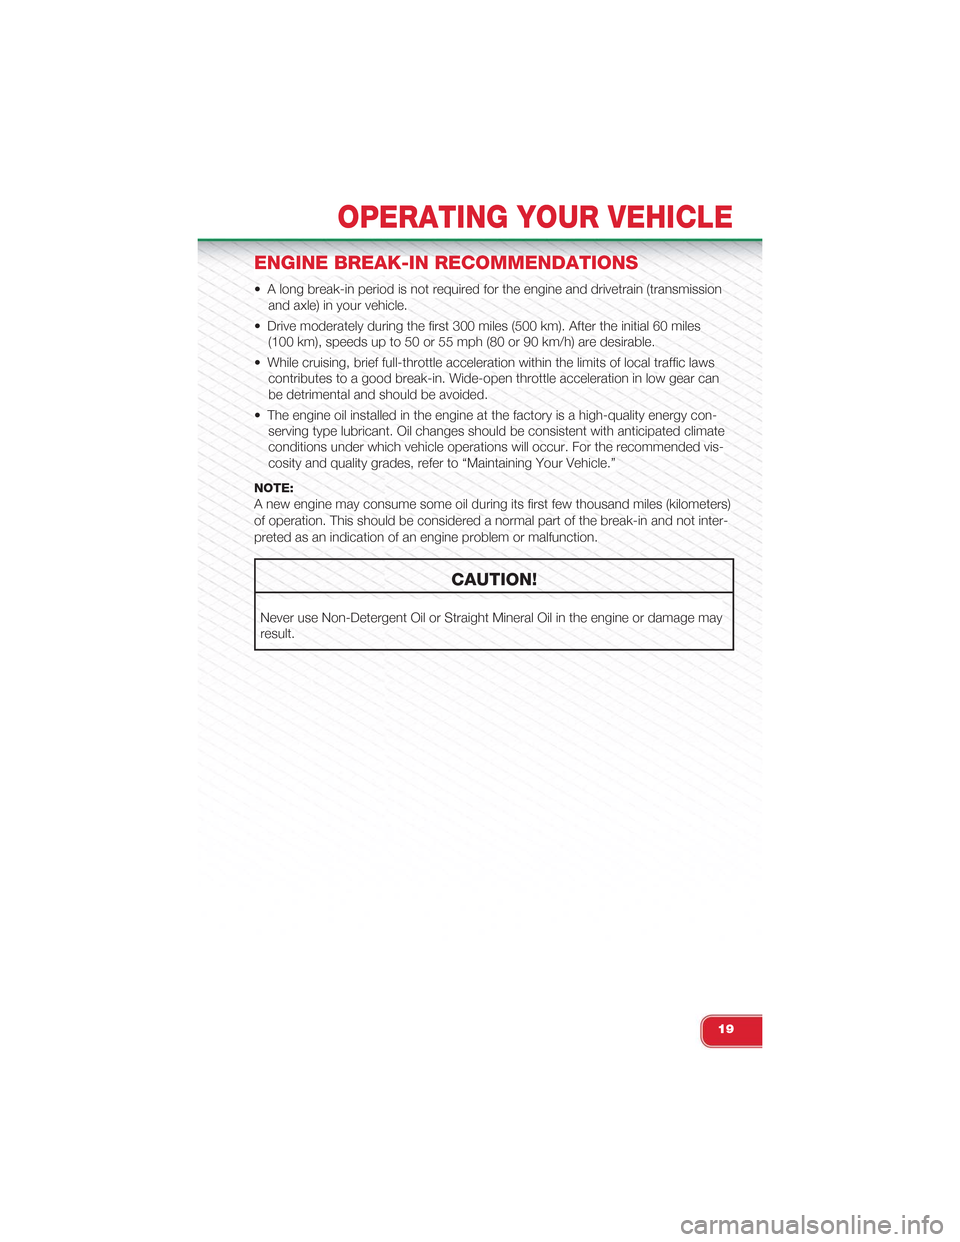 FIAT 500 ABARTH 2014 2.G User Guide ENGINE BREAK-IN RECOMMENDATIONS
• A long break-in period is not required for the engine and drivetrain (transmission
and axle) in your vehicle.
• Drive moderately during the first 300 miles (500 k